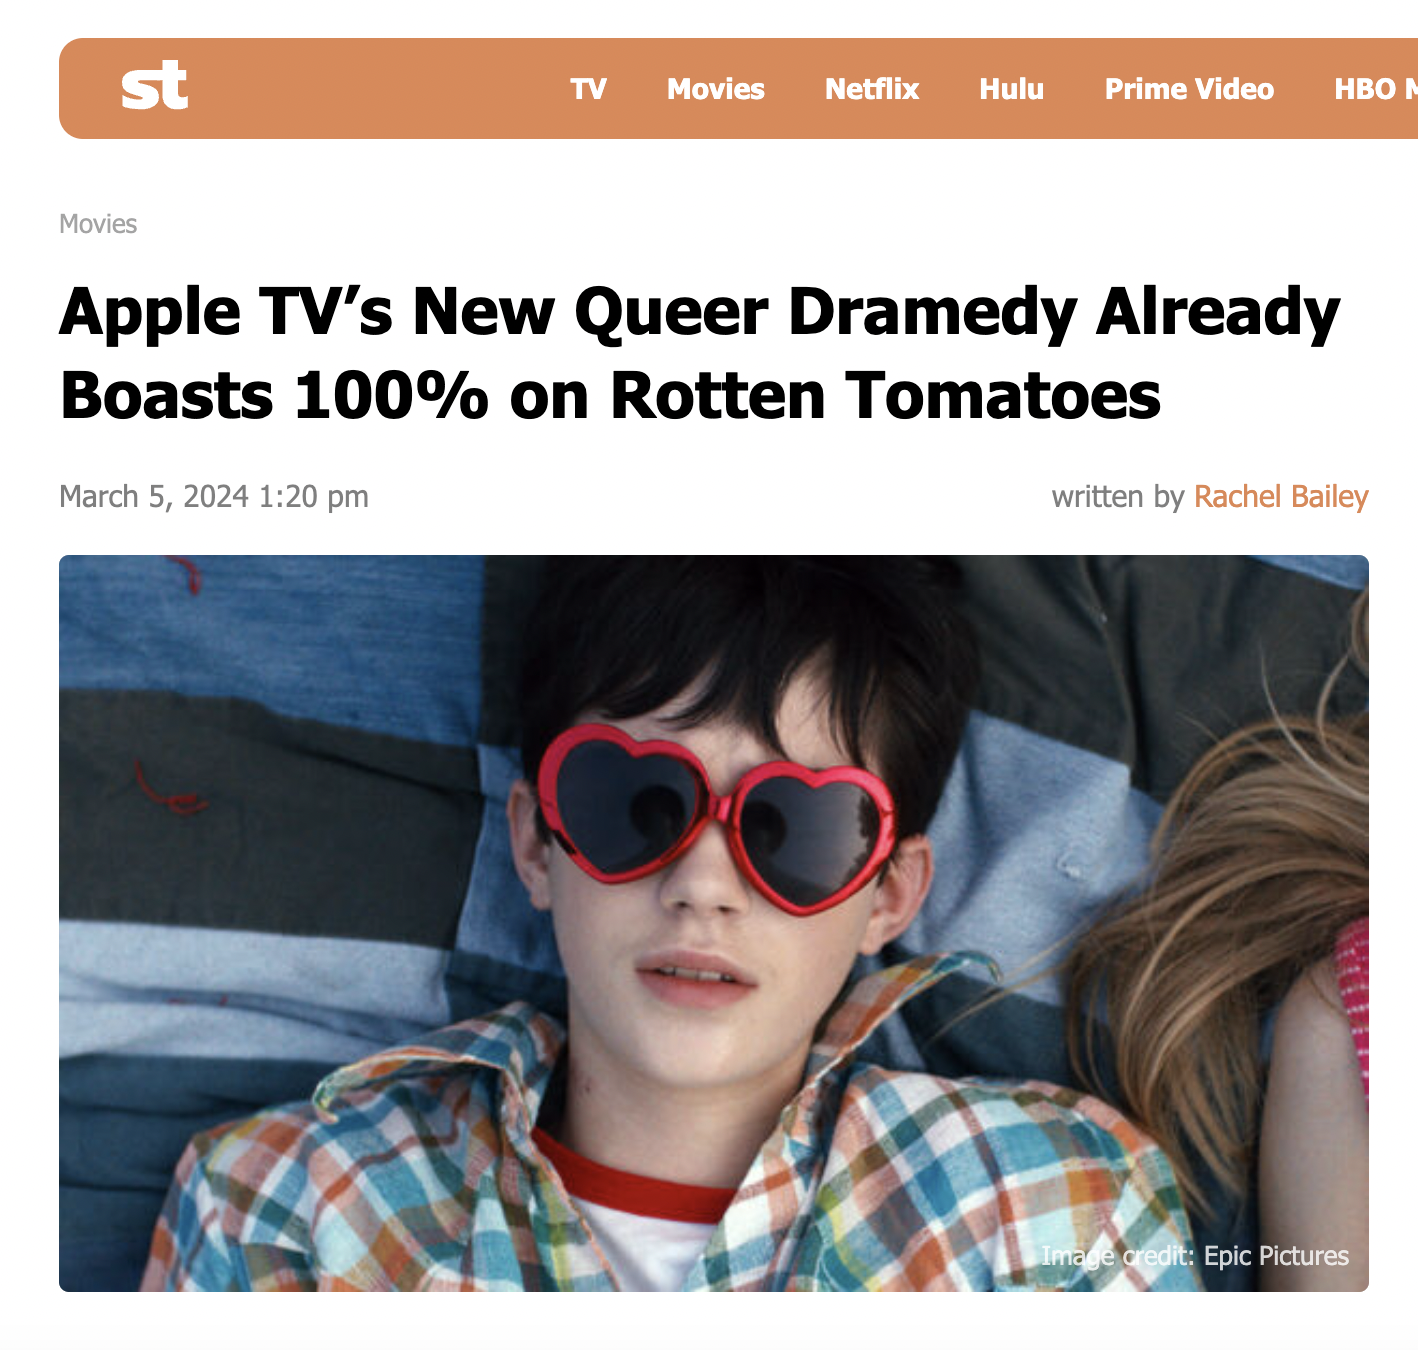 Apple TV’s New Queer Dramedy Already Boasts 100% on Rotten Tomatoes